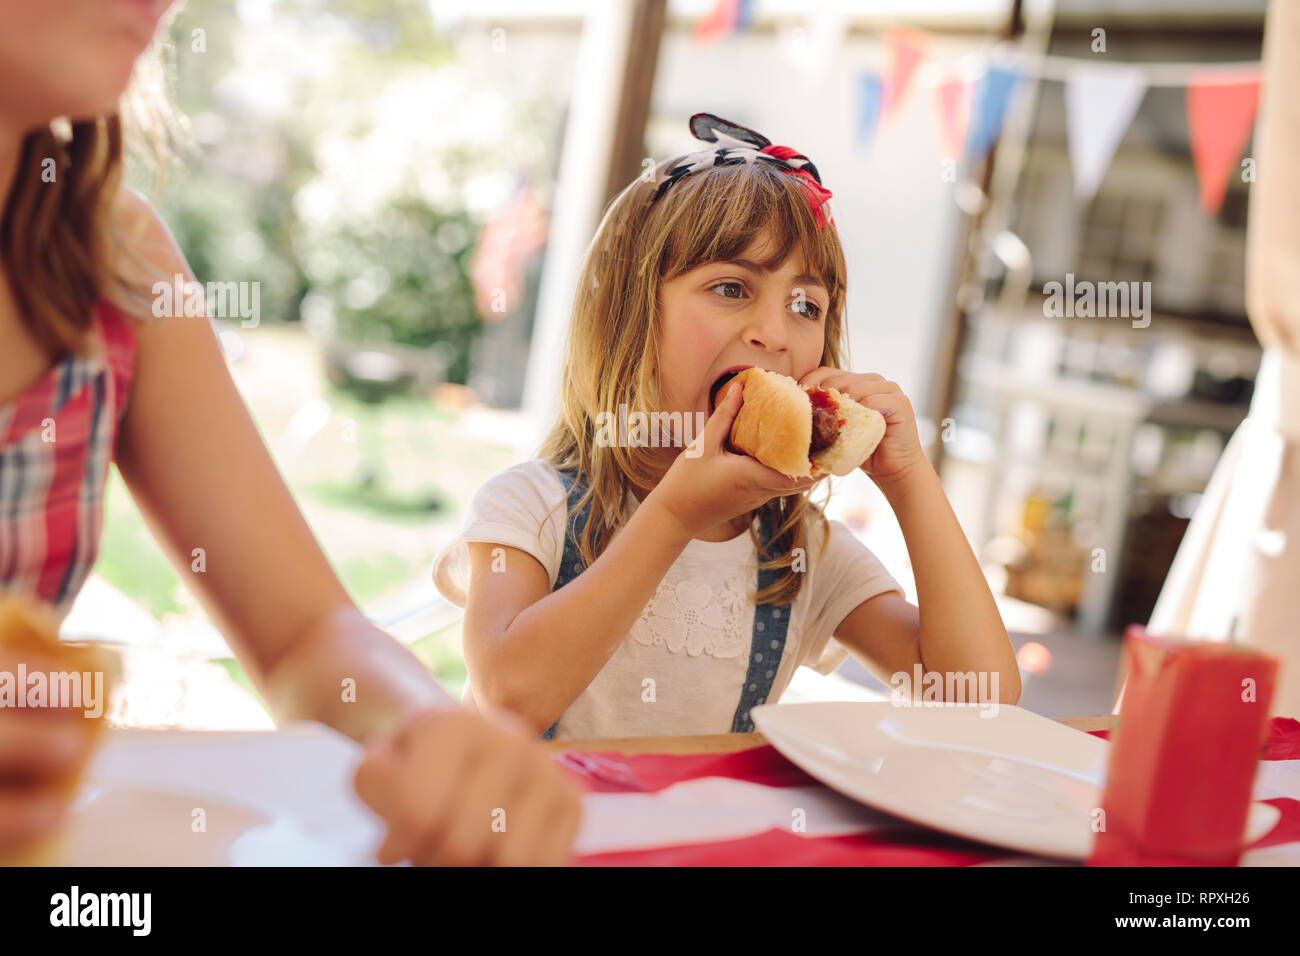 Girl eating a hot dog sitting with her family. Little girl enjoying a hotdog at a restaurant. Stock Photo